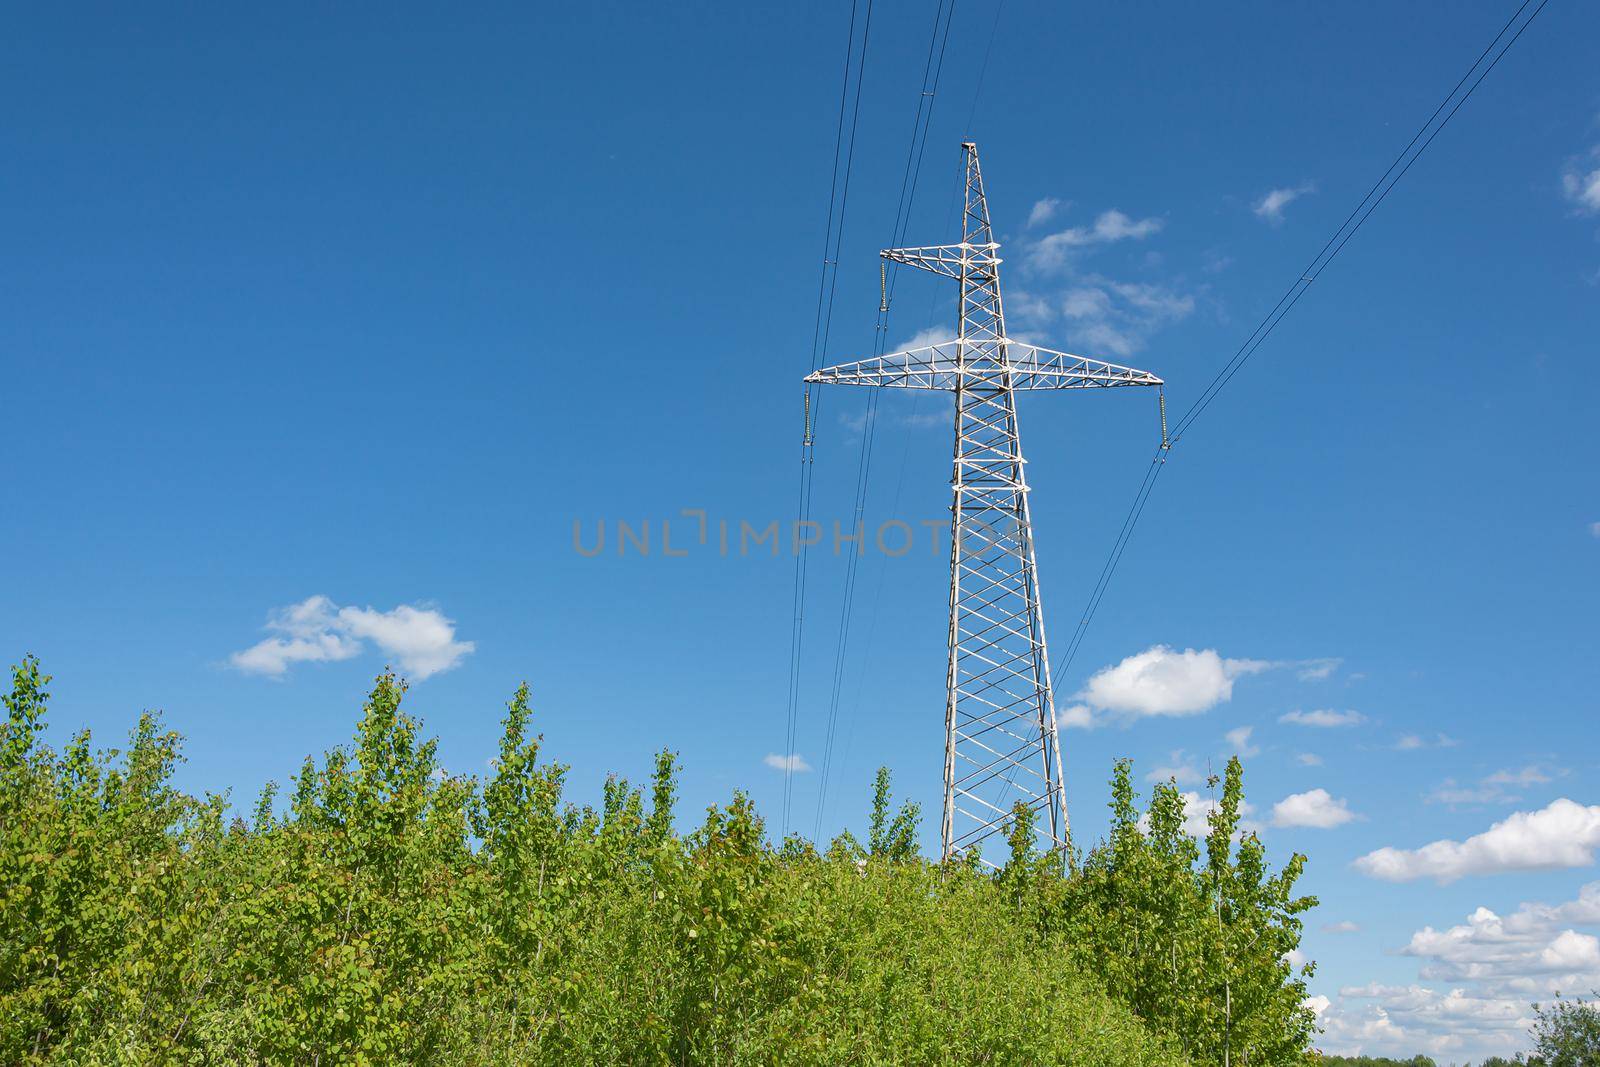 Industry. Support mast and high-voltage power line. Stock photo.